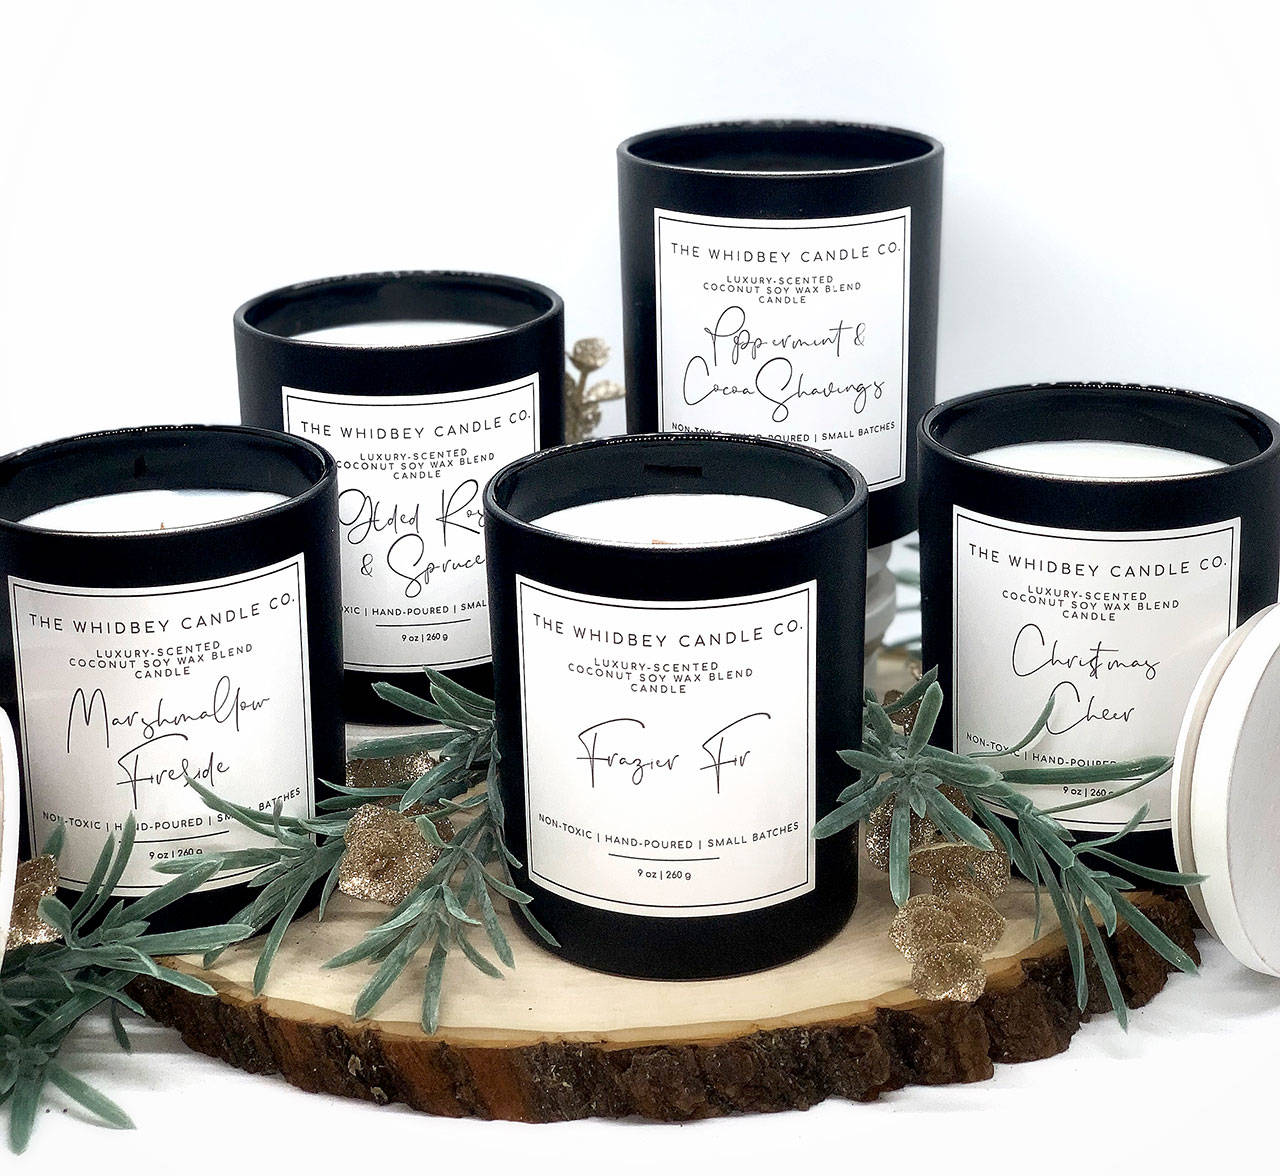 Taylor Horton’s small-batch candles use natural ingredients that the new mother said she is comfortable using around her newborn. Photo provided.